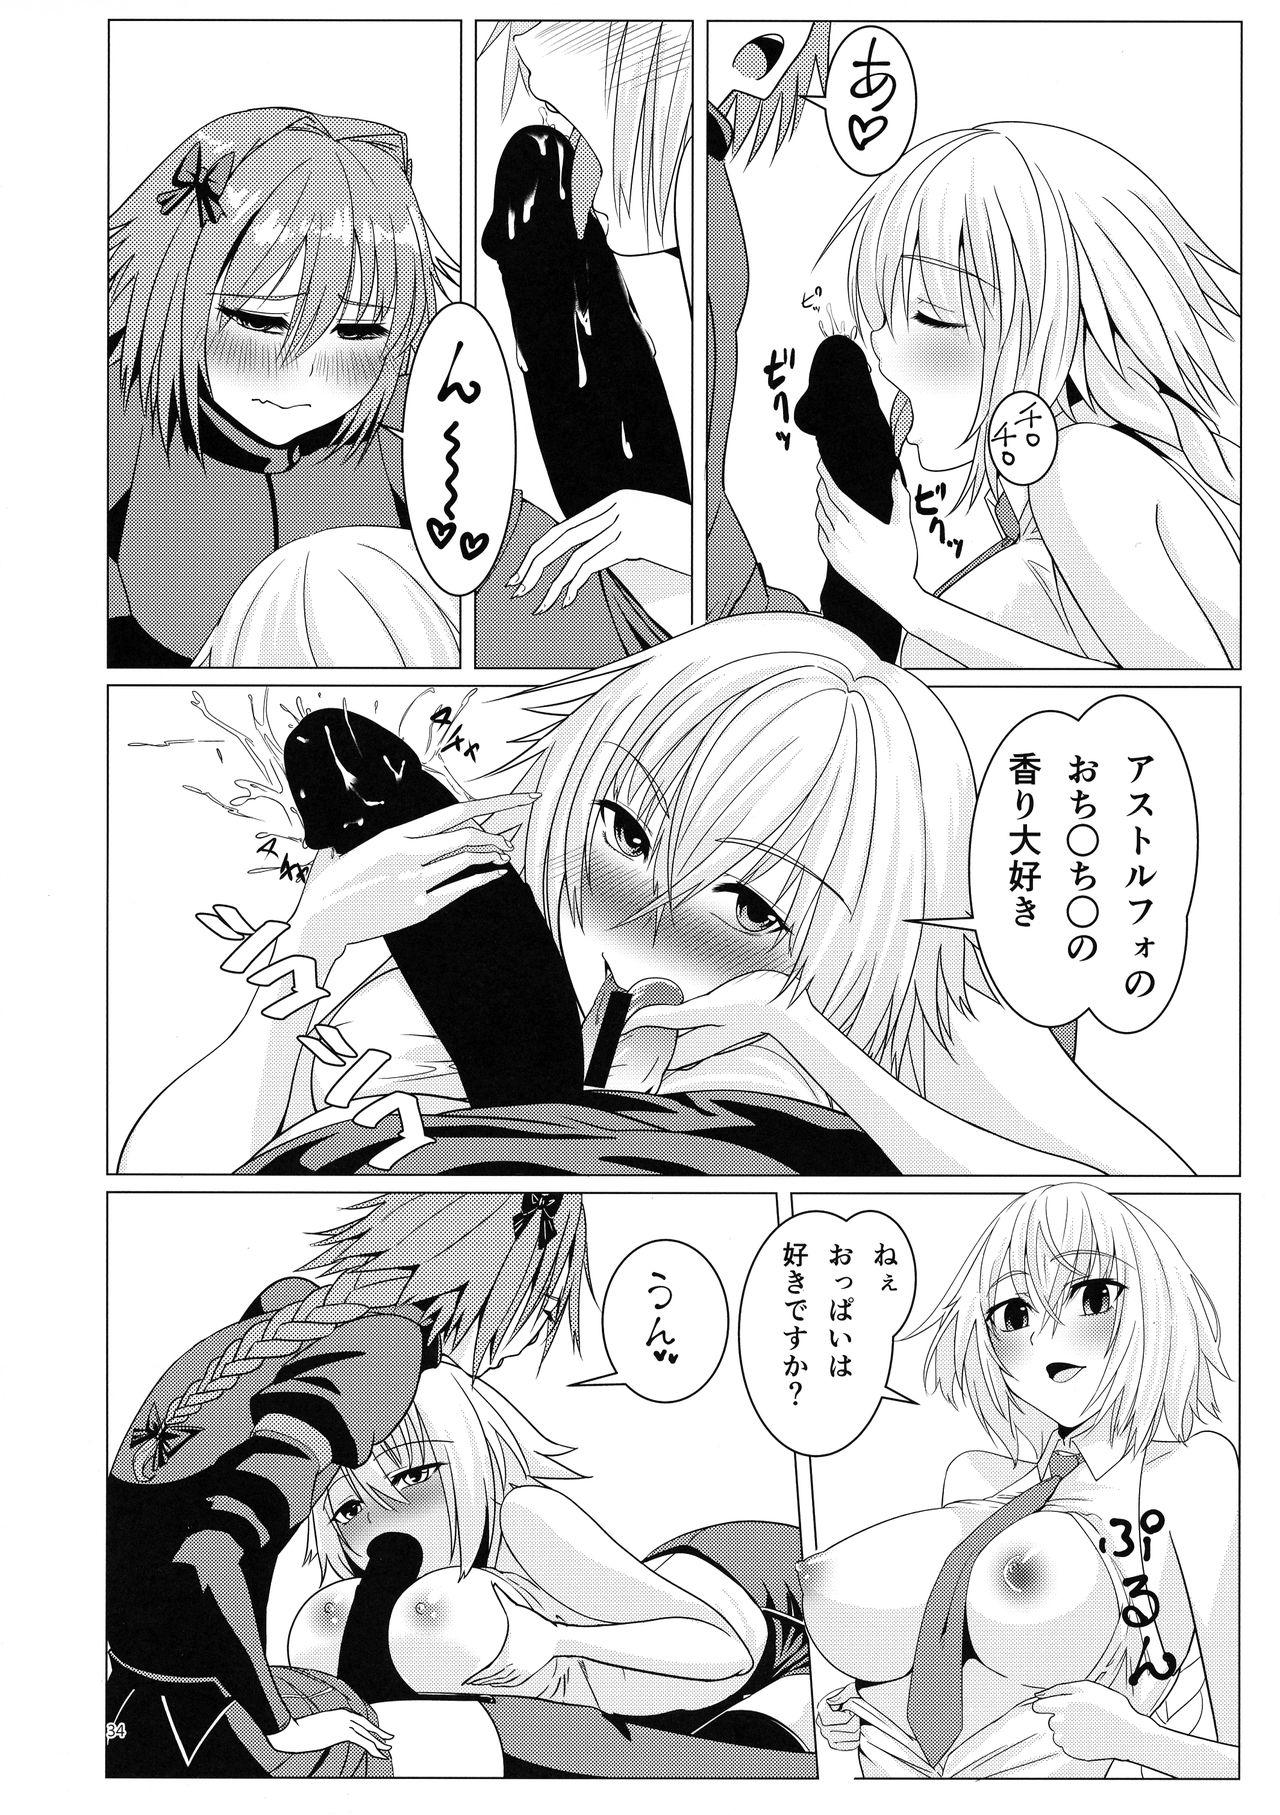 Matching Spirits - Jeanne and Astolfo have sex 30